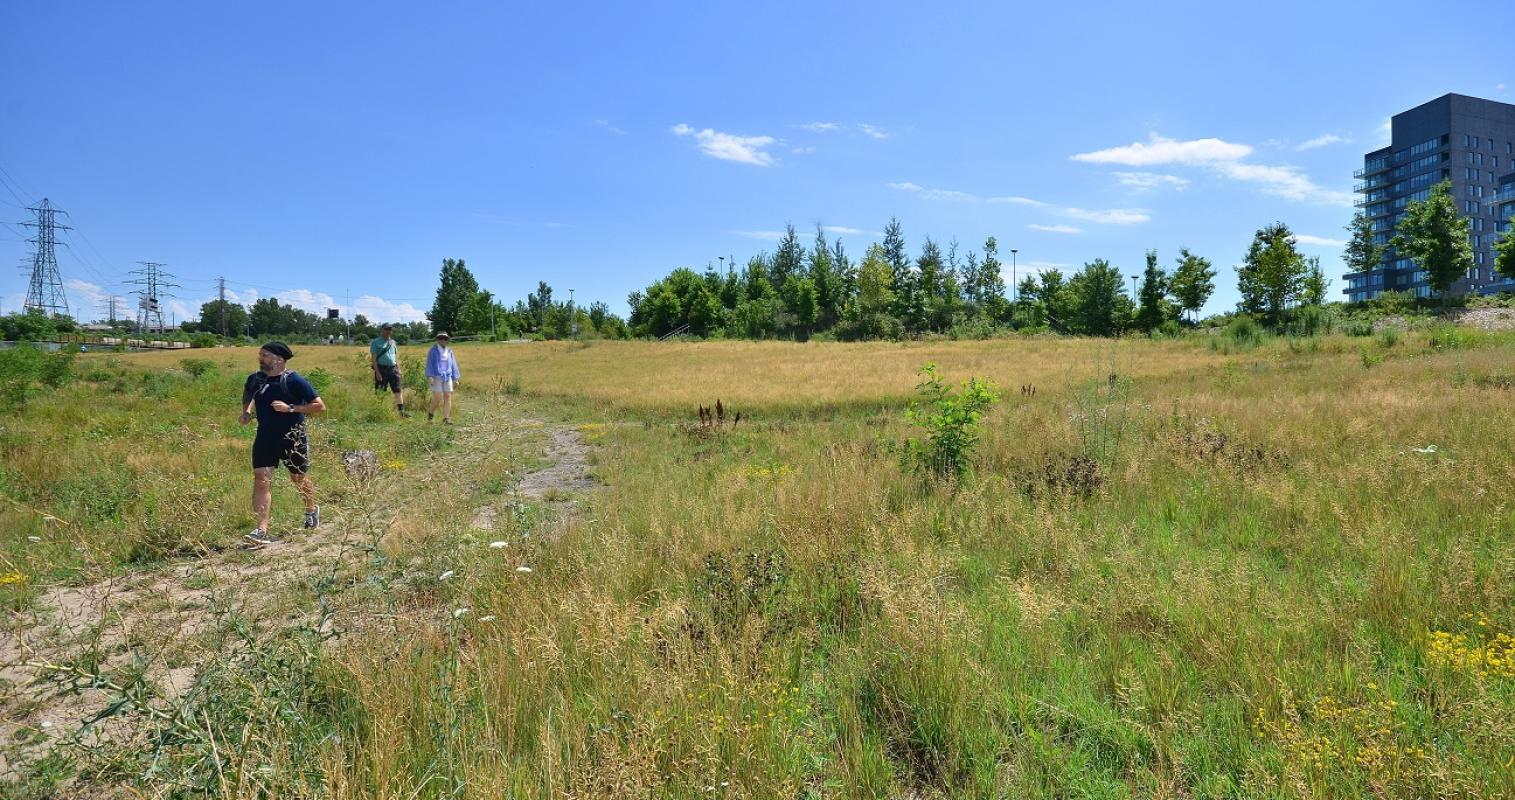 people walking through a grassy open trail on a sunny day